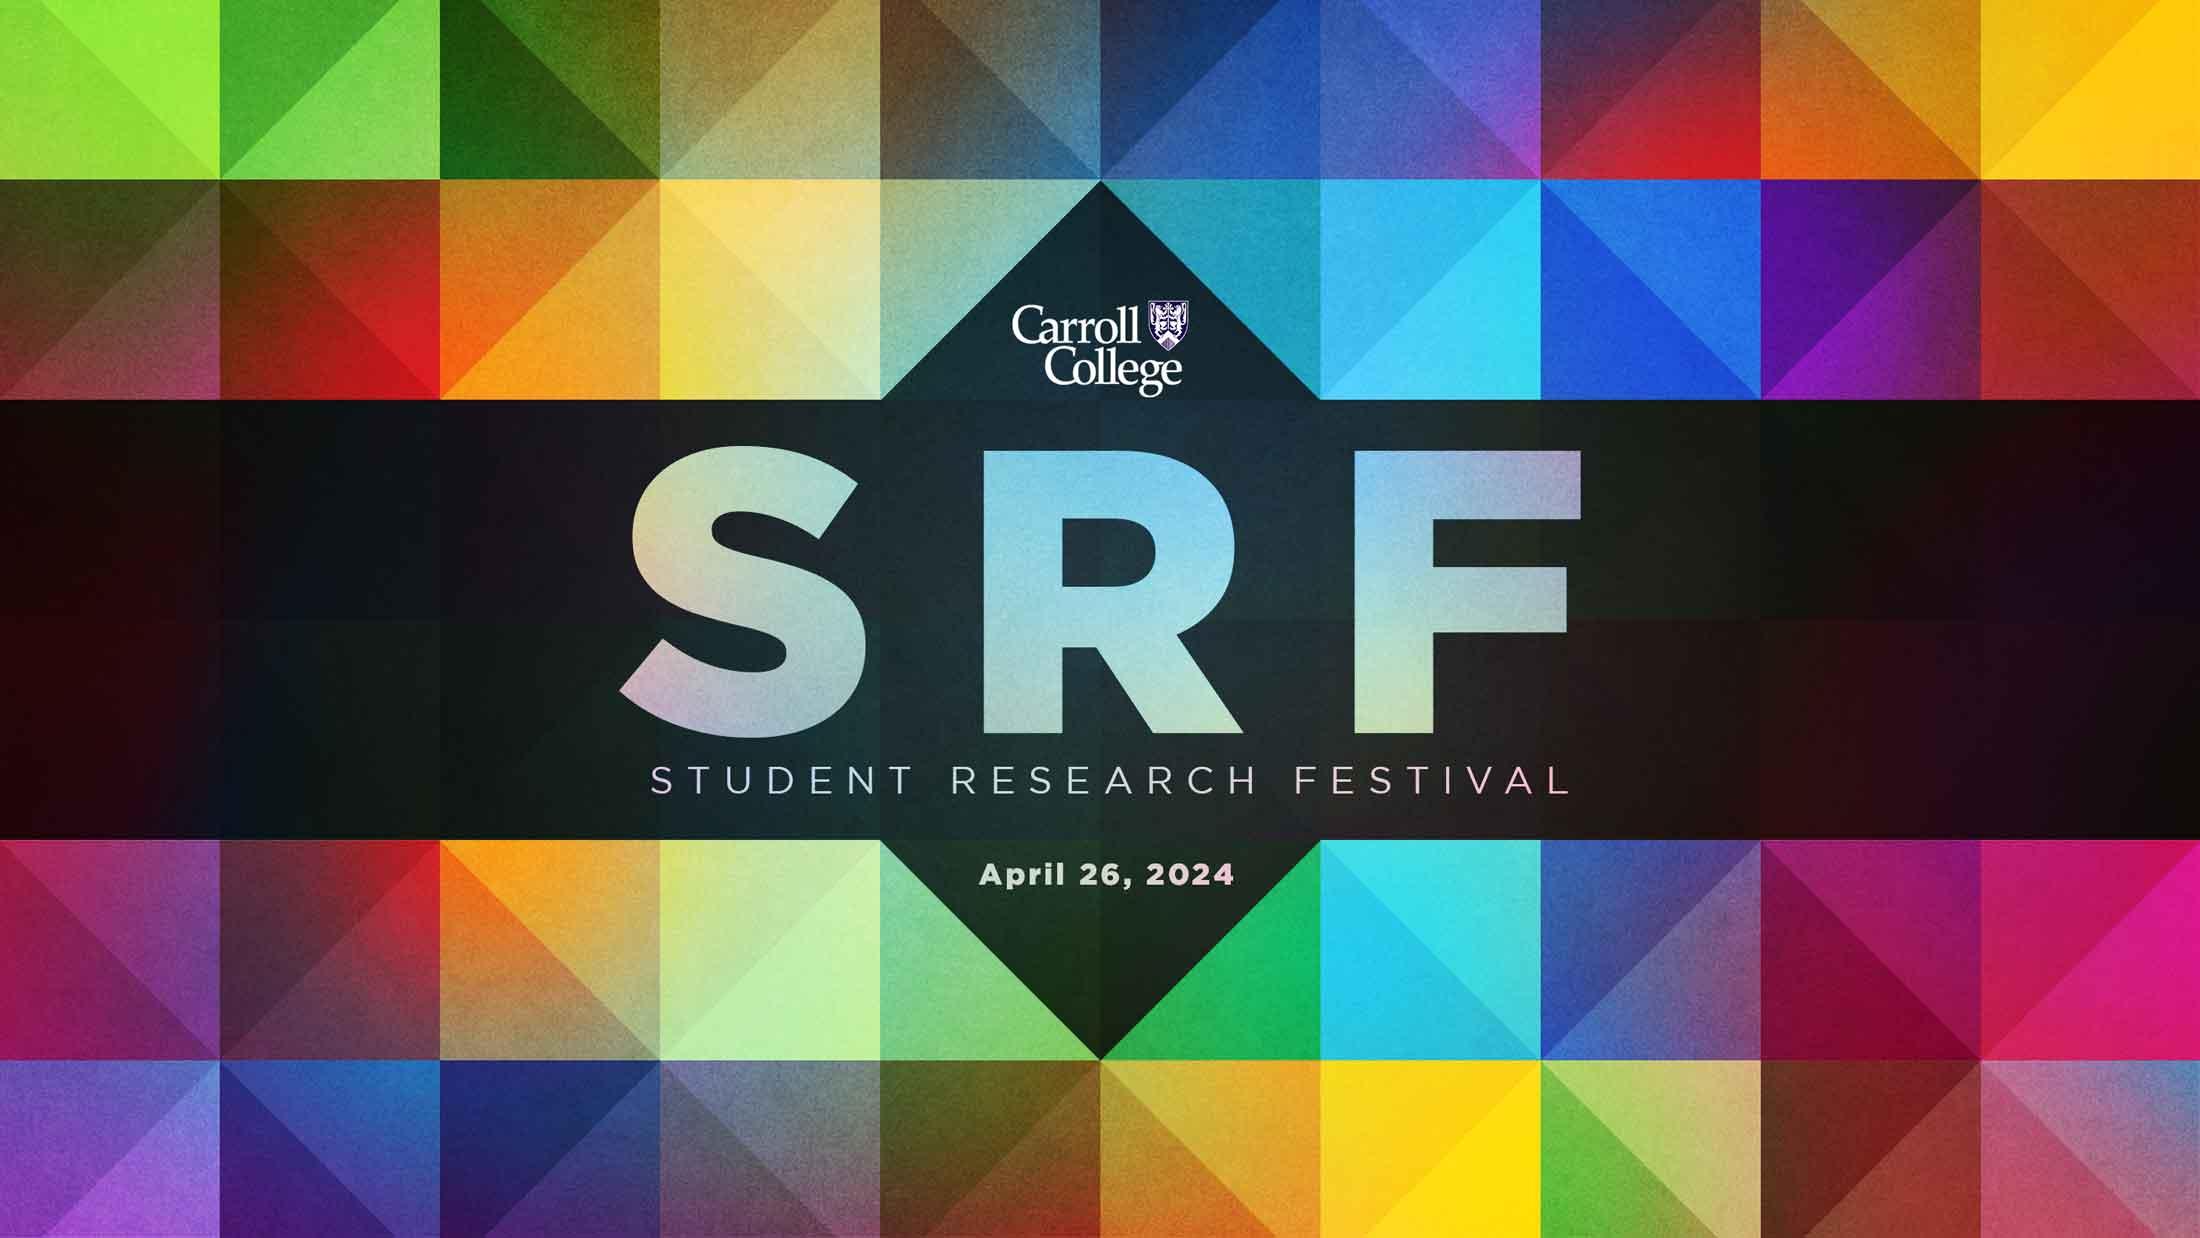 Student Research Fesitival